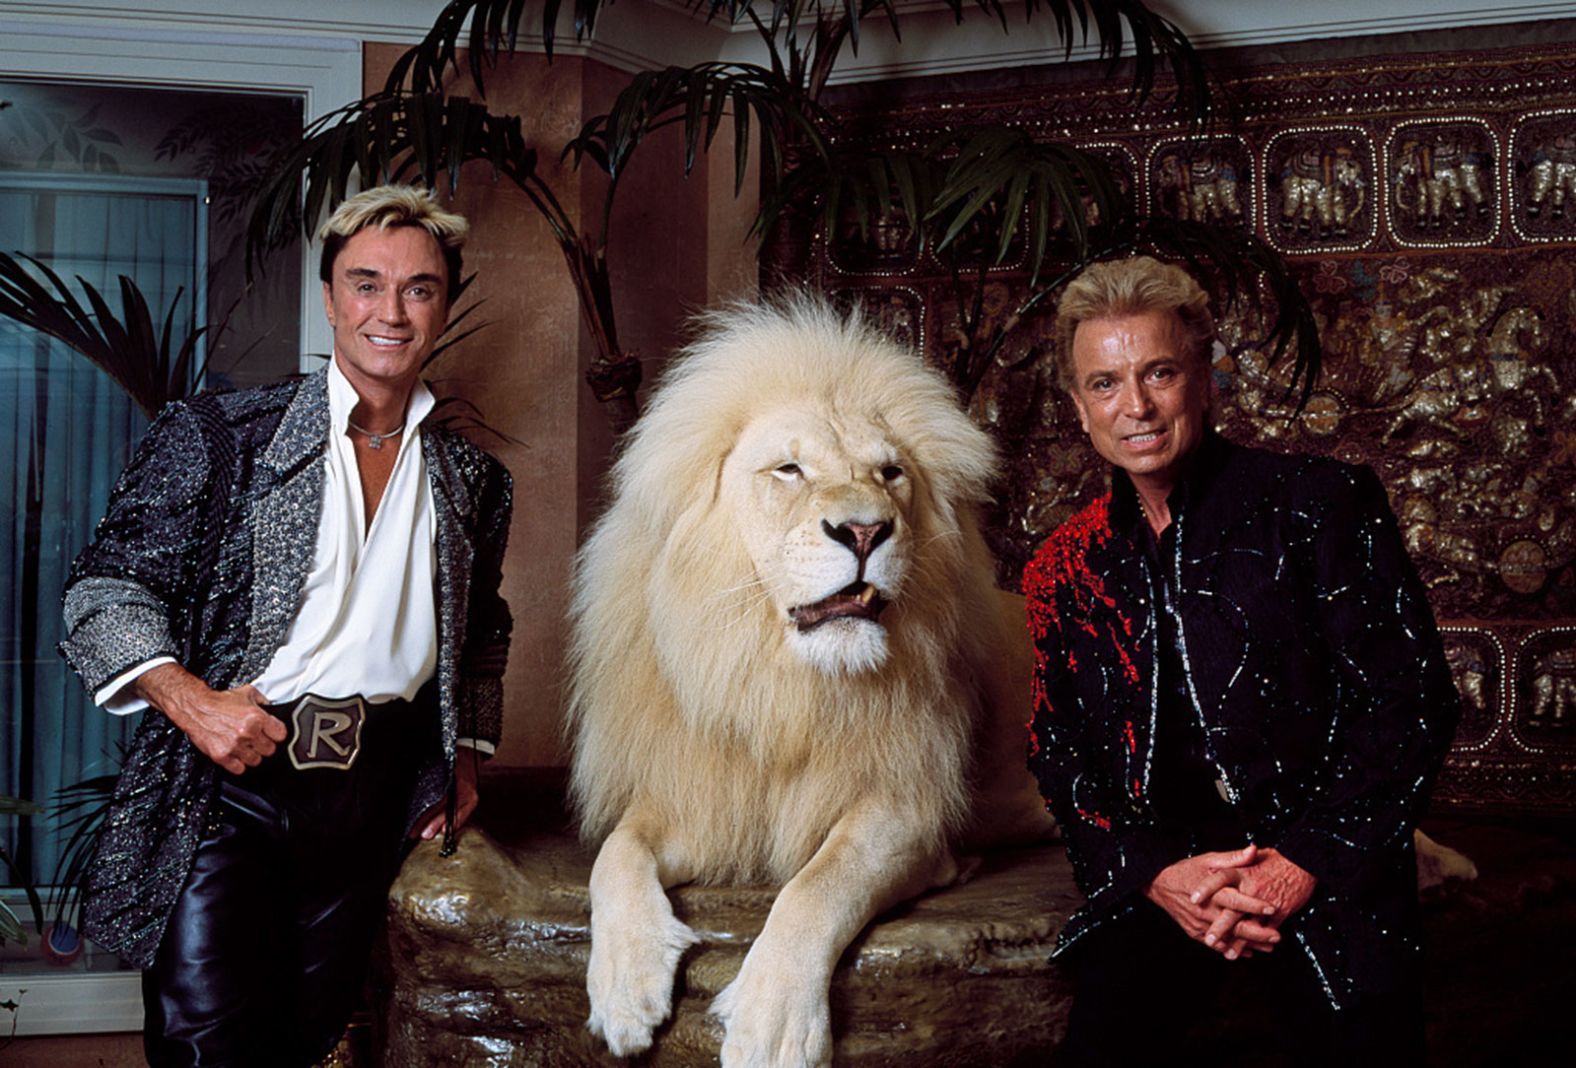 The duo poses with a lion in Las Vegas in 2003.